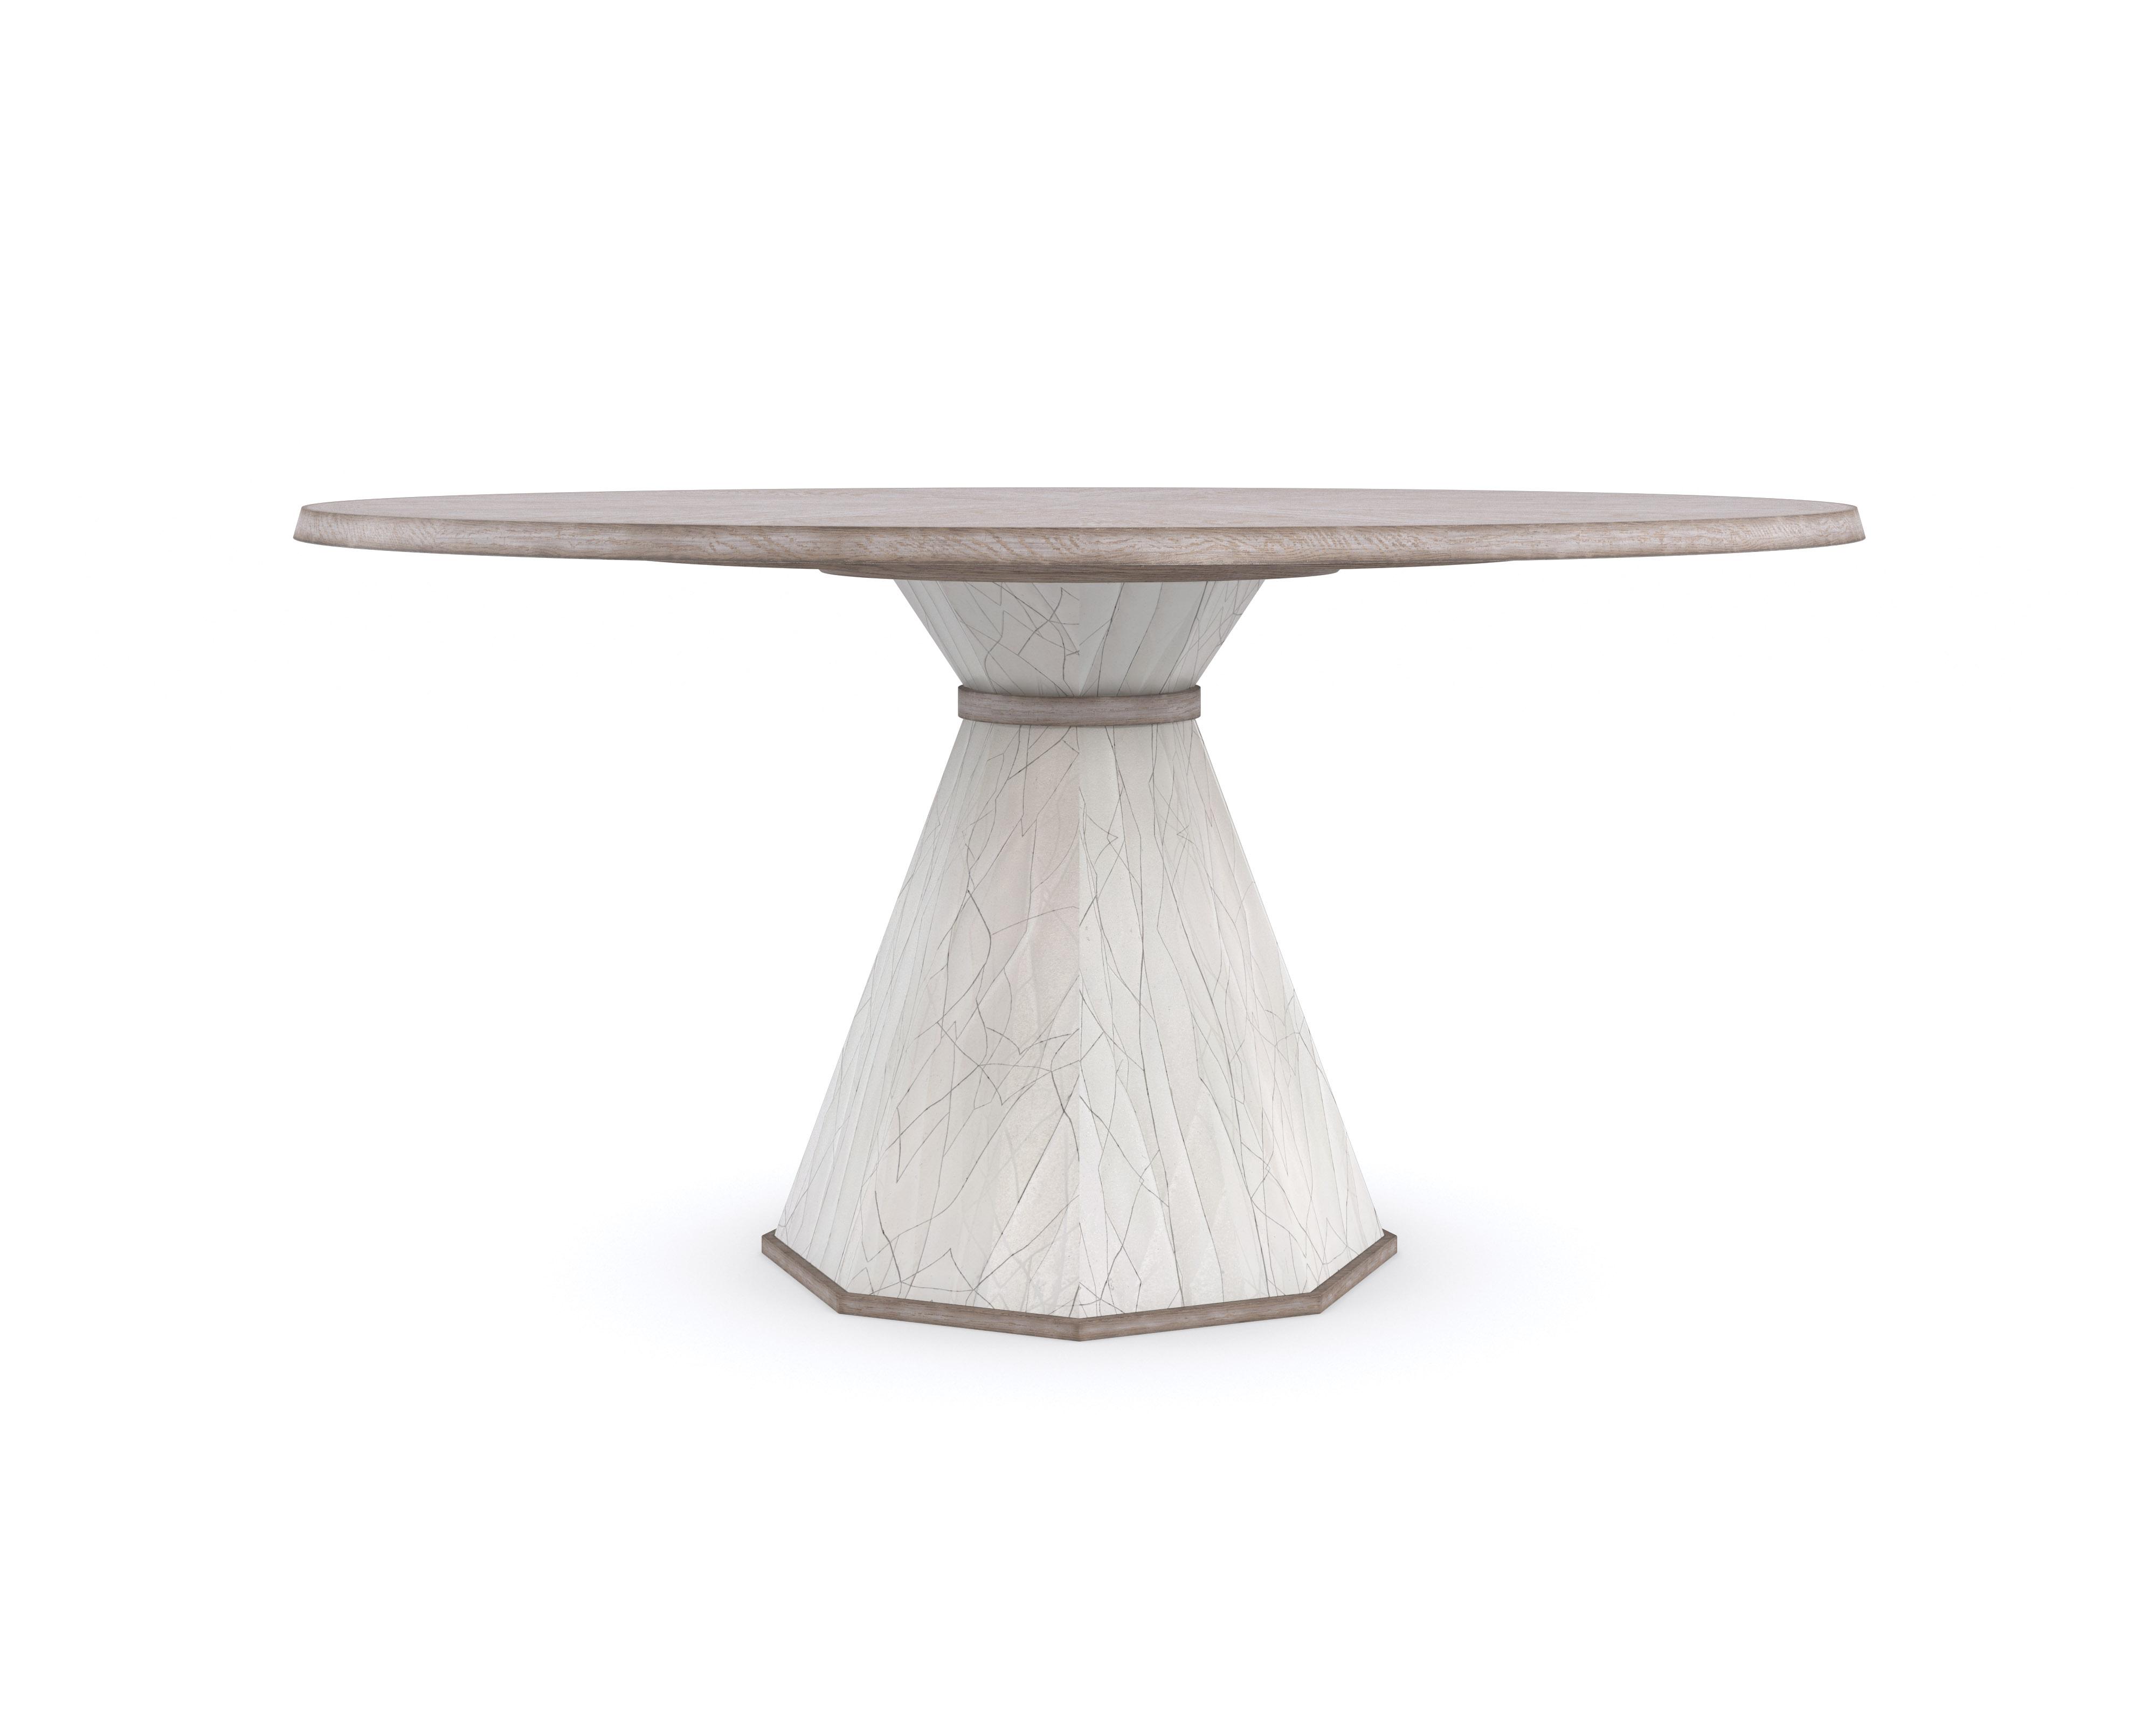 Contemporary Dining Table Around The Edge 60 CLA-020-208 in Driftwood 